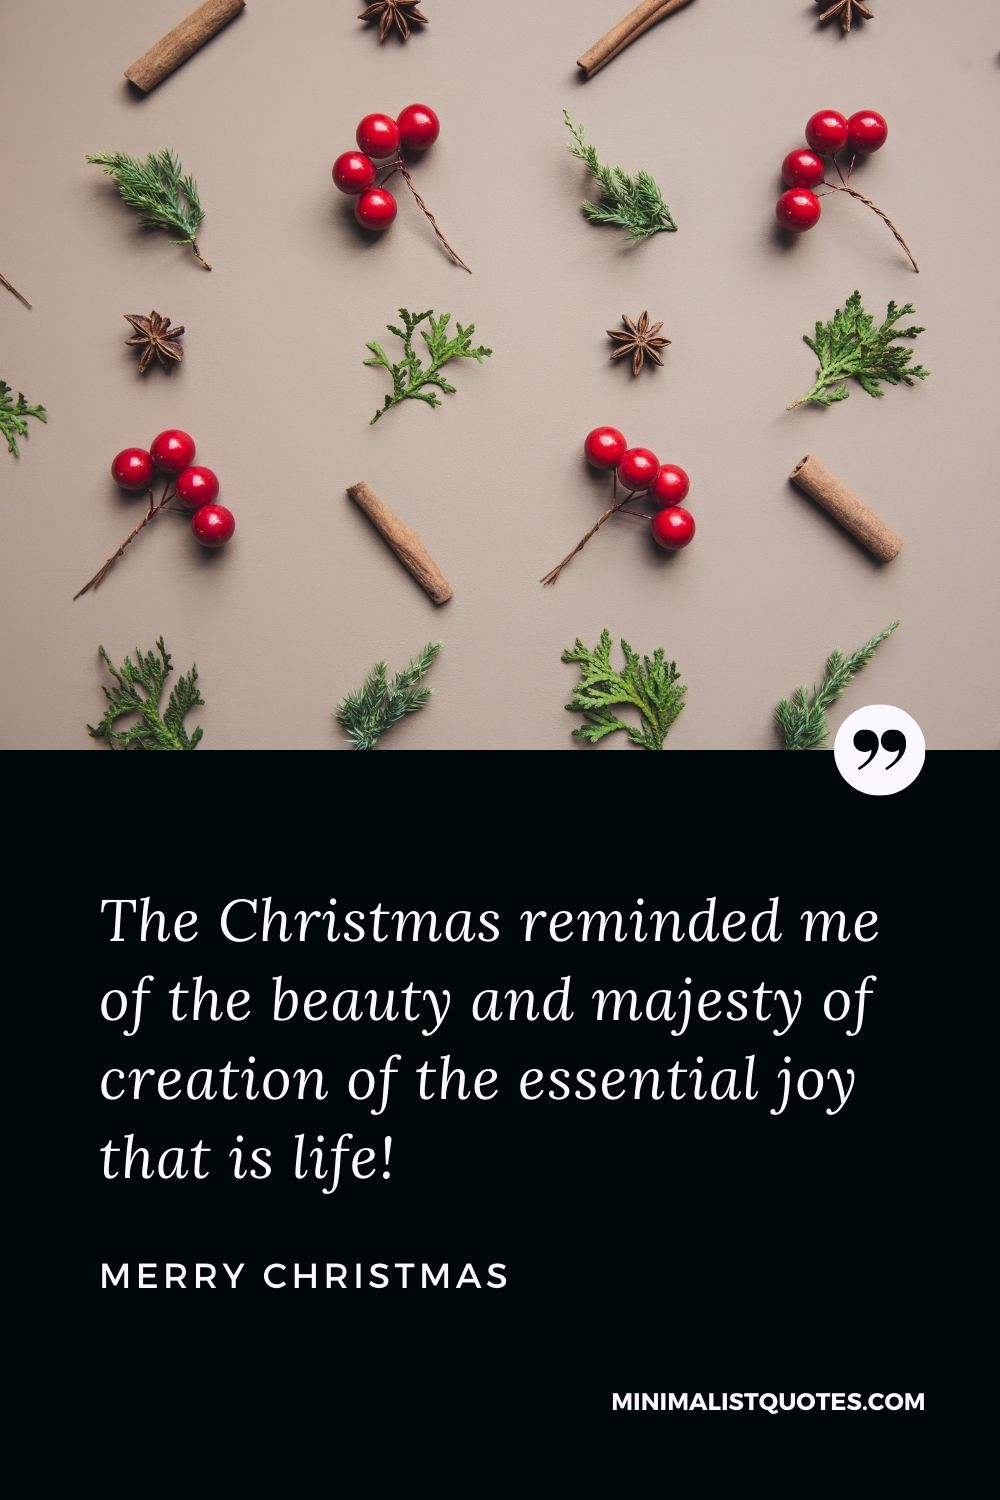 Merry Christmas Wish - The Christmas reminded me of the beauty and majesty of creation of the essential joy that is life.